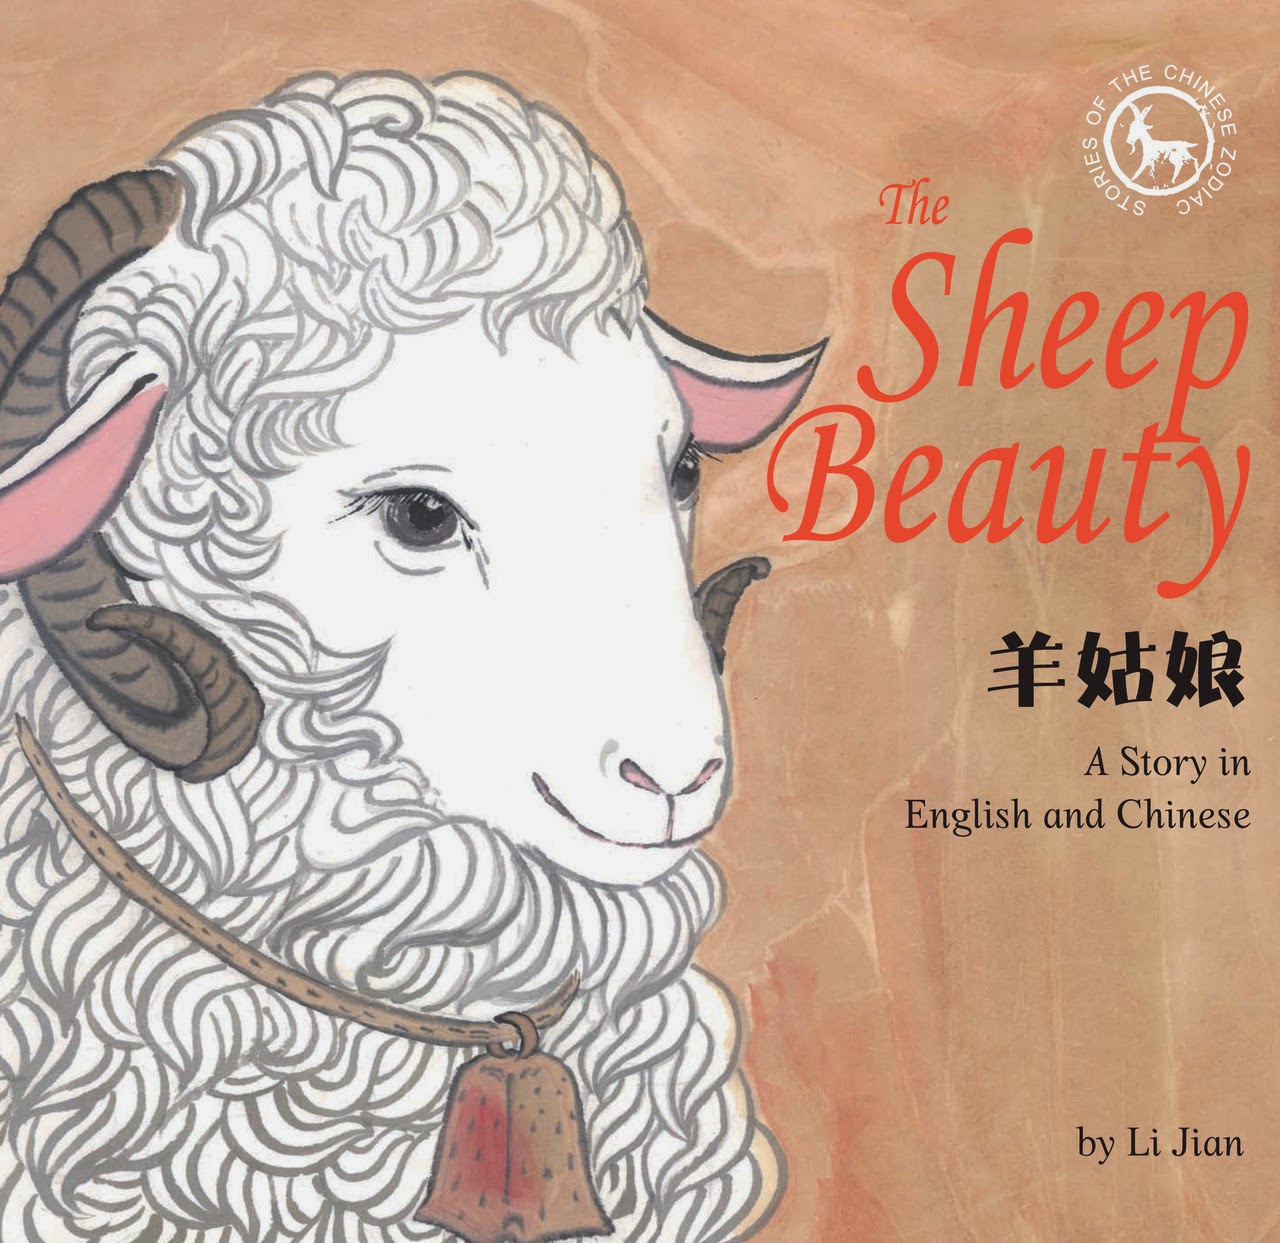 http://www.tuttlepublishing.com/books-by-country/the-sheep-beauty-hardcover-with-jacket